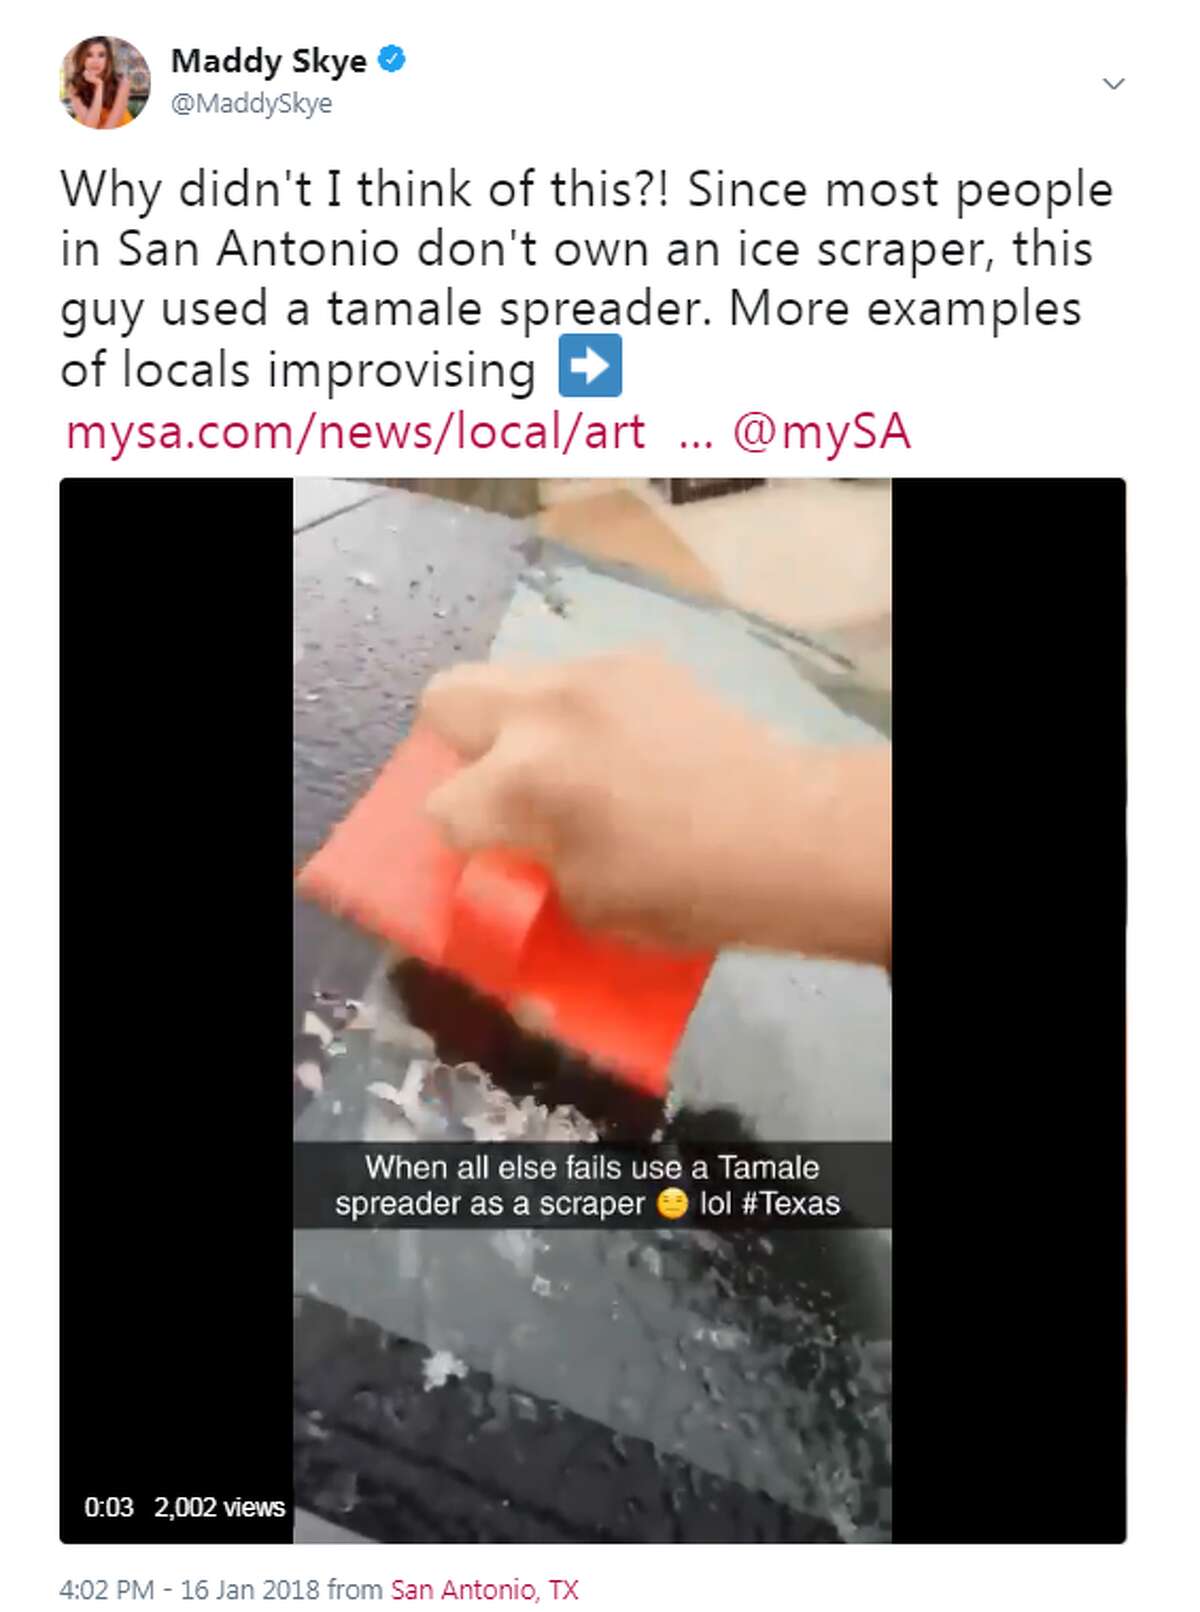 San Antonians, typically don't own ice scrapers, so they improvised with tamale spreaders Tamale scraper